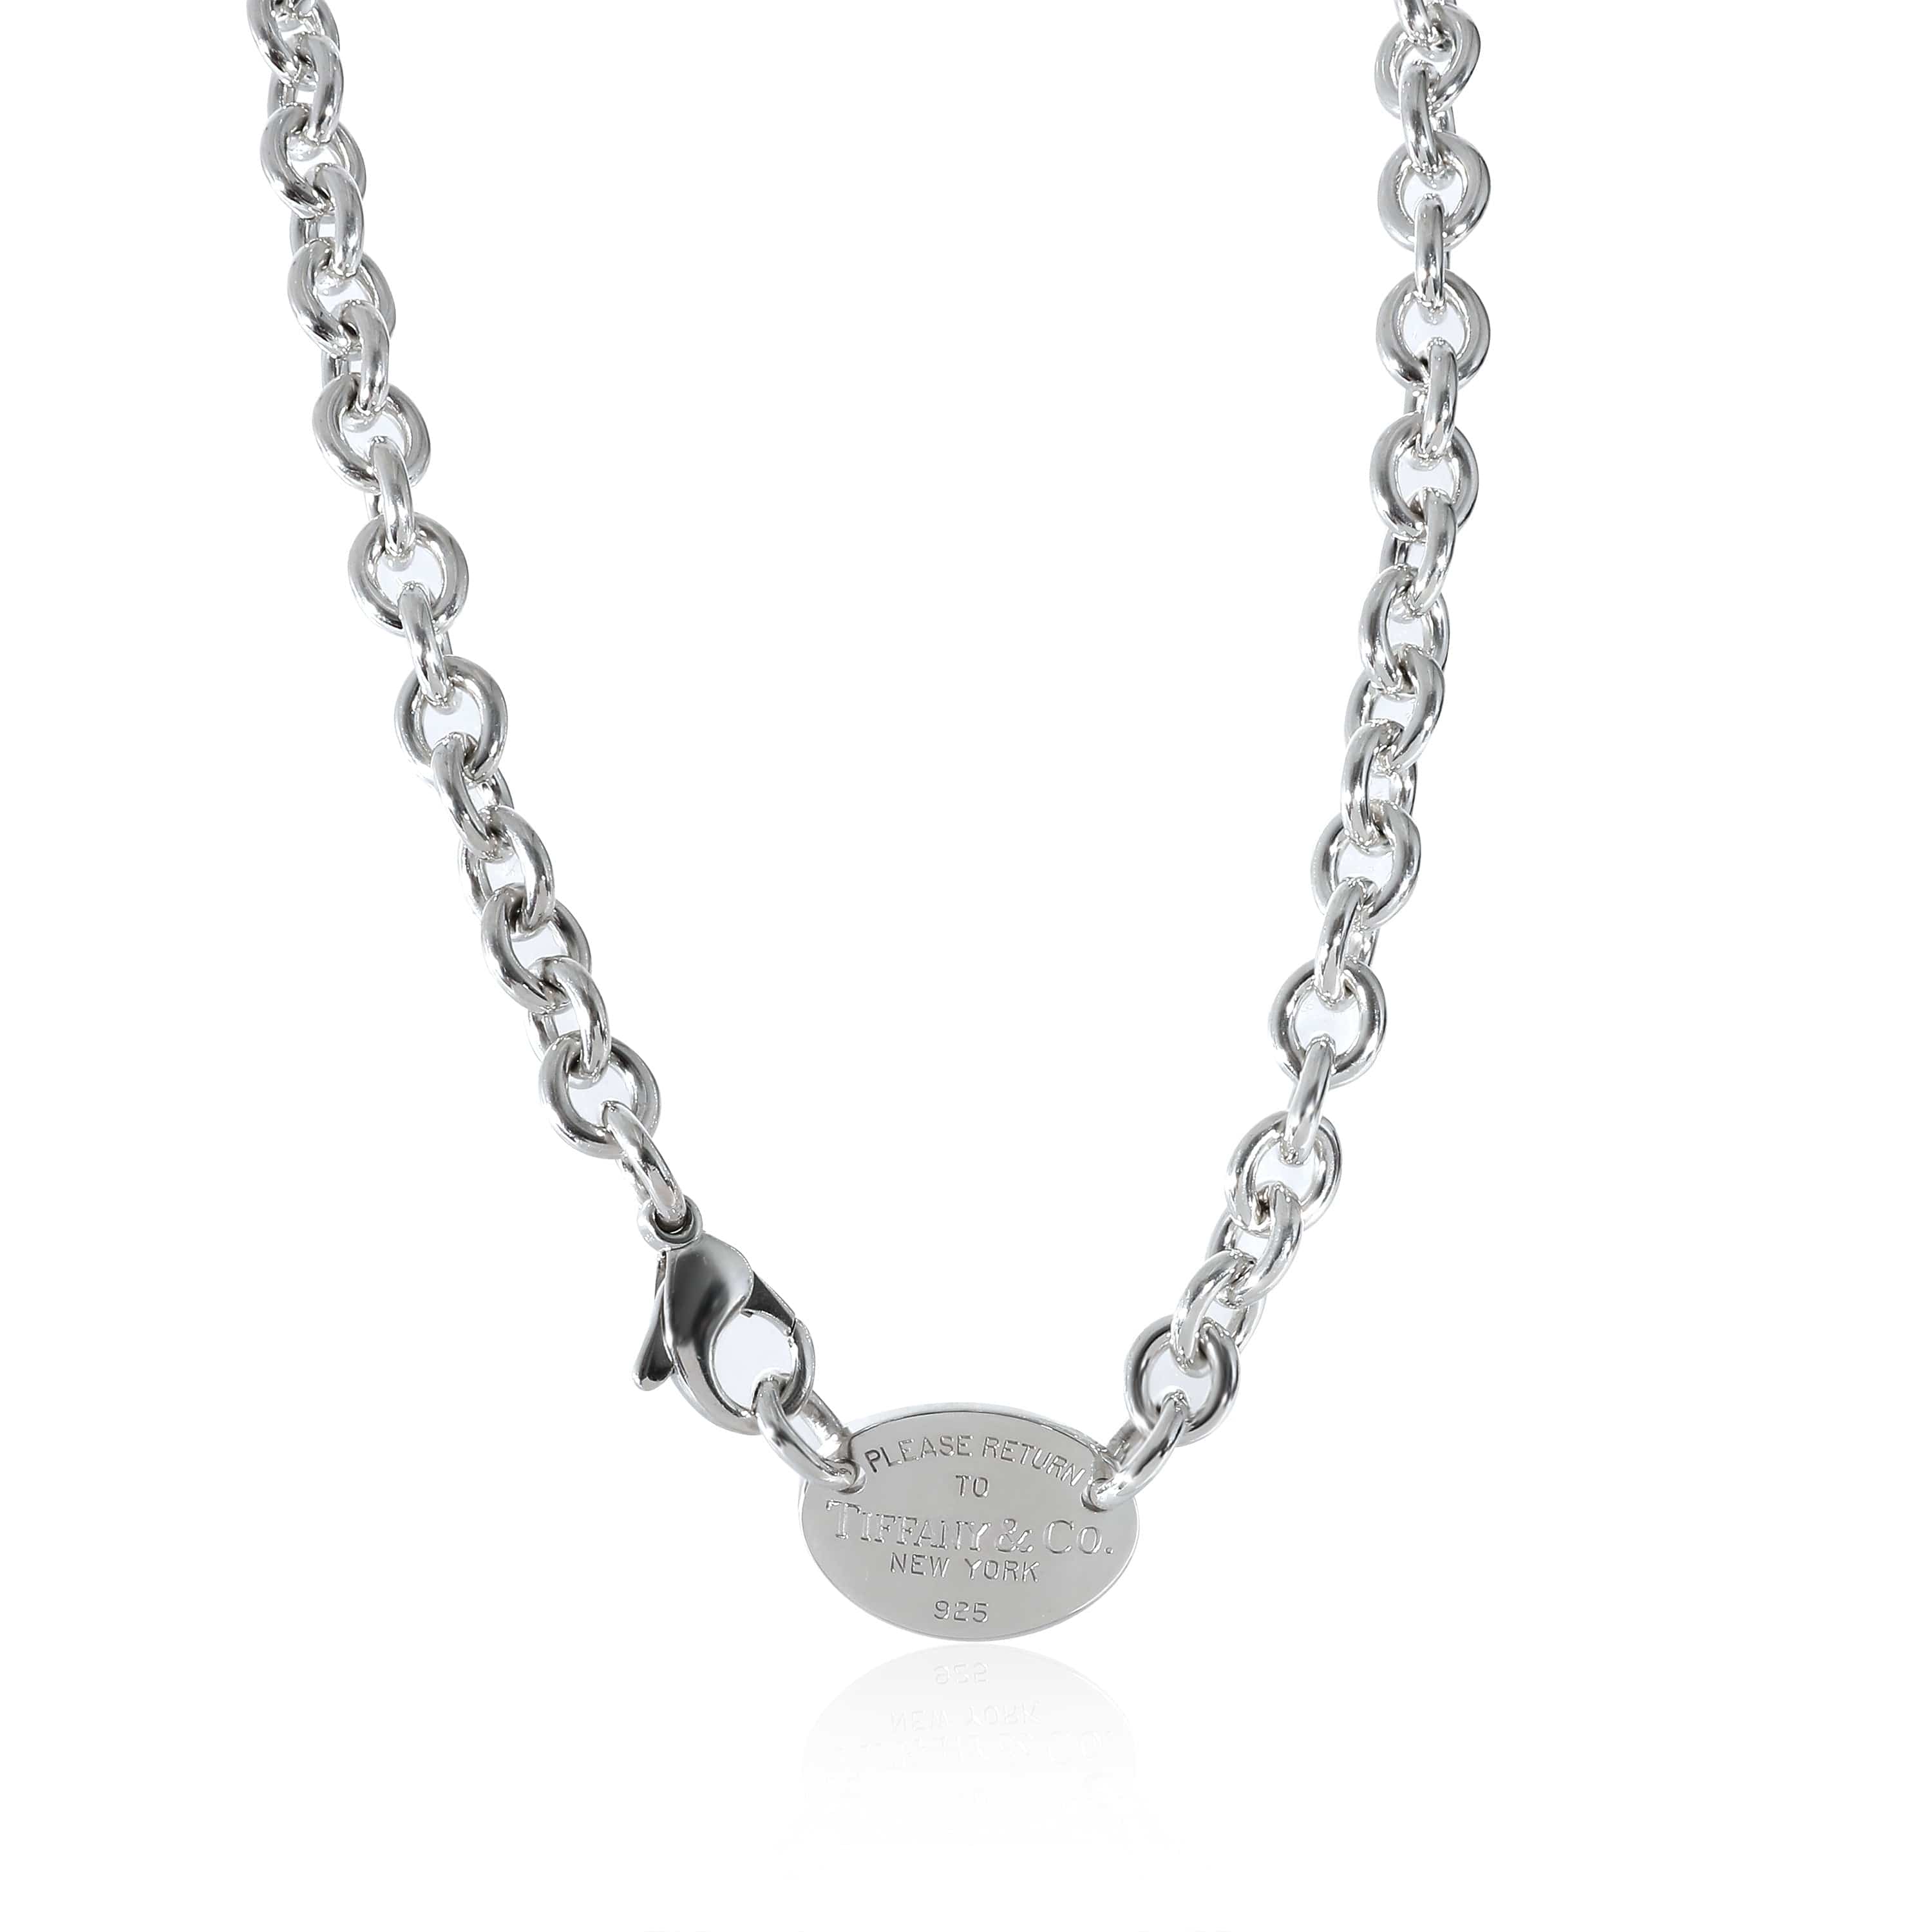 Tiffany & Co. Tiffany & Co. Return To Tiffany Necklace in Sterling Silver